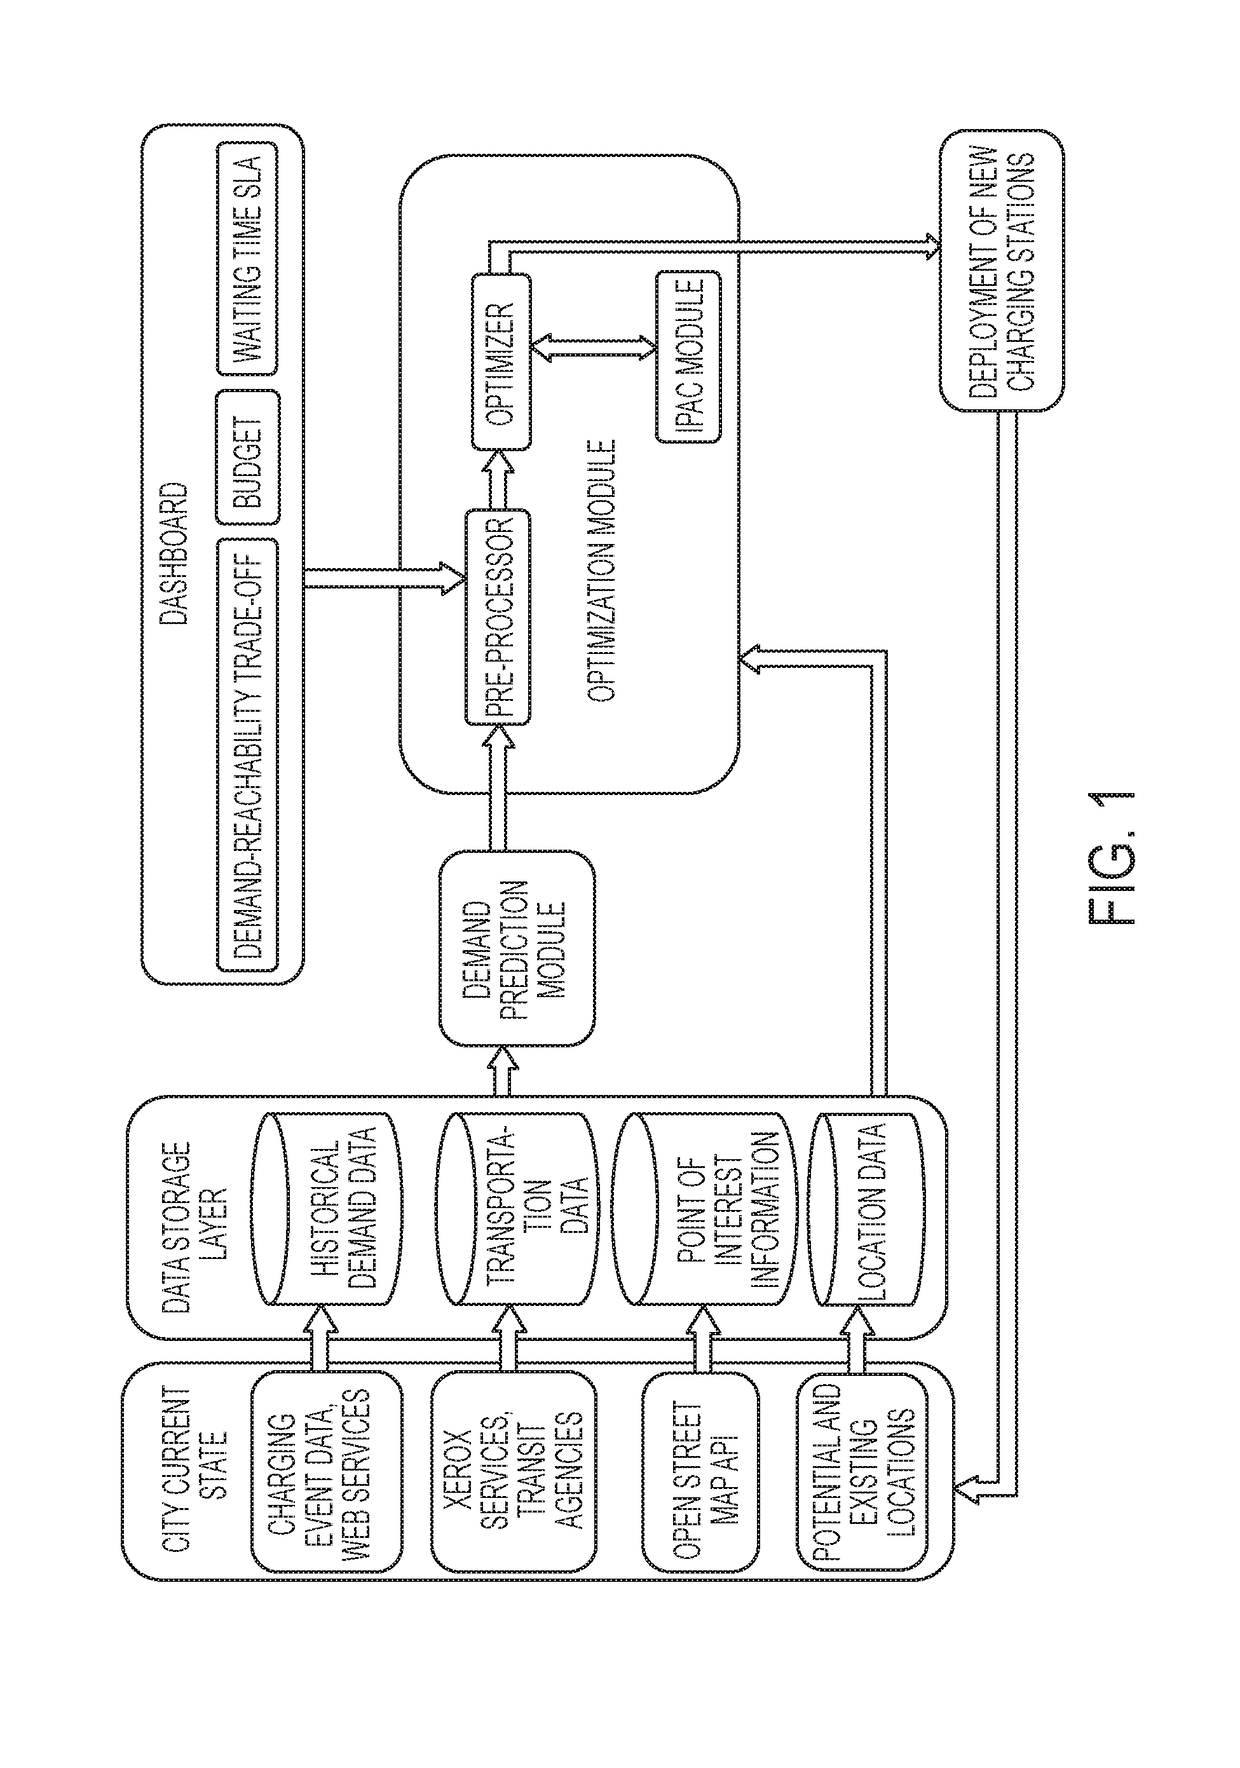 Method of planning for deployment of facilities and apparatus associated therewith